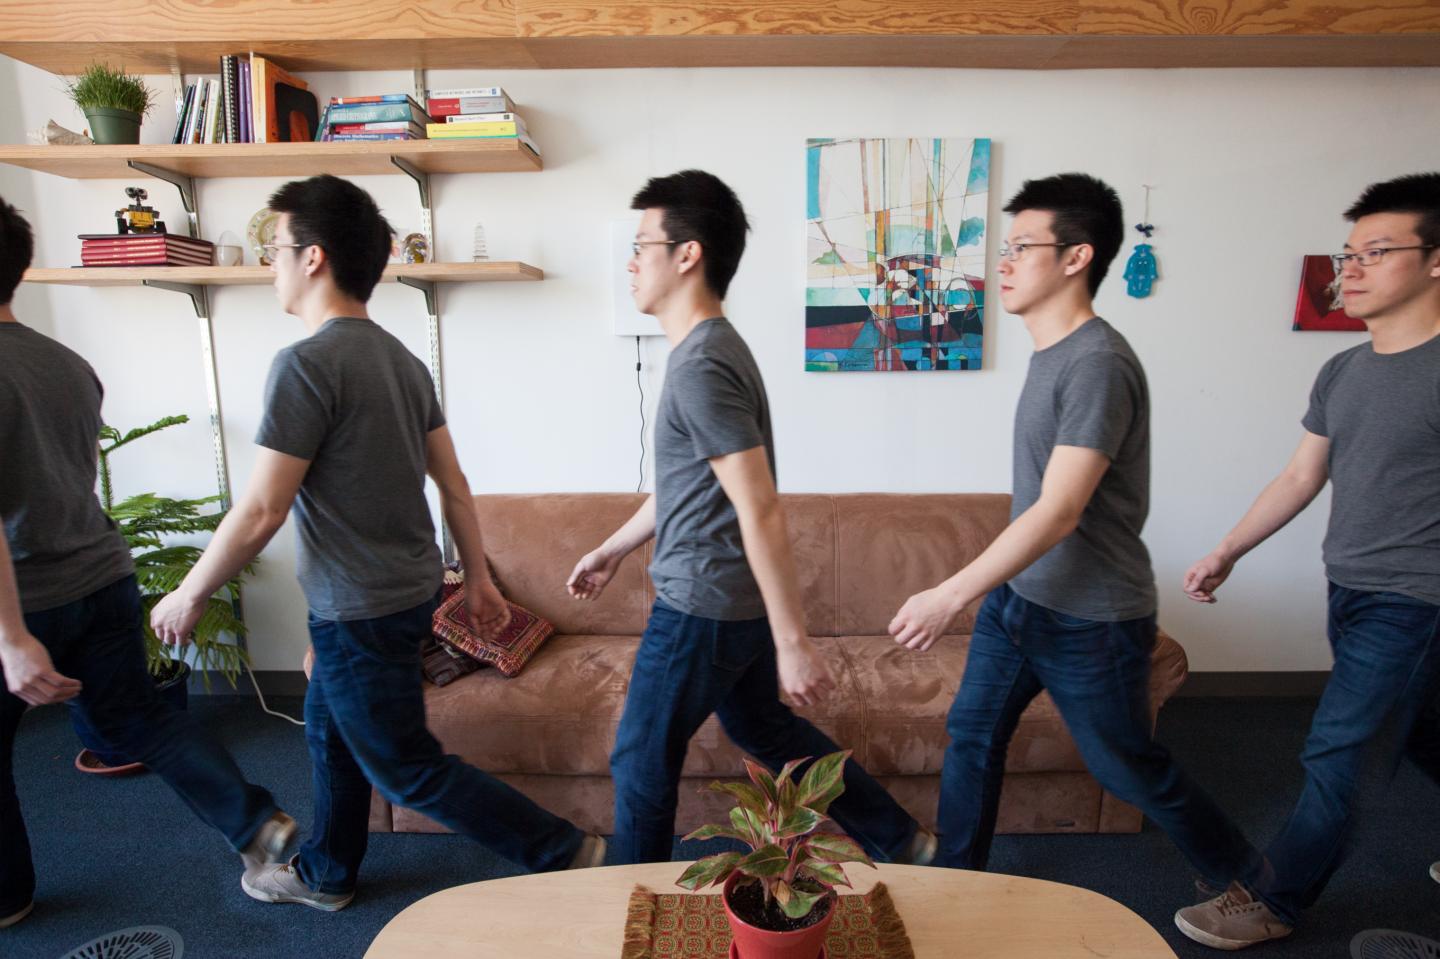 WiGait uses wireless signals to continuously measure a person's walking speed. Image credit: Jason Dorfman, MIT CSAIL 